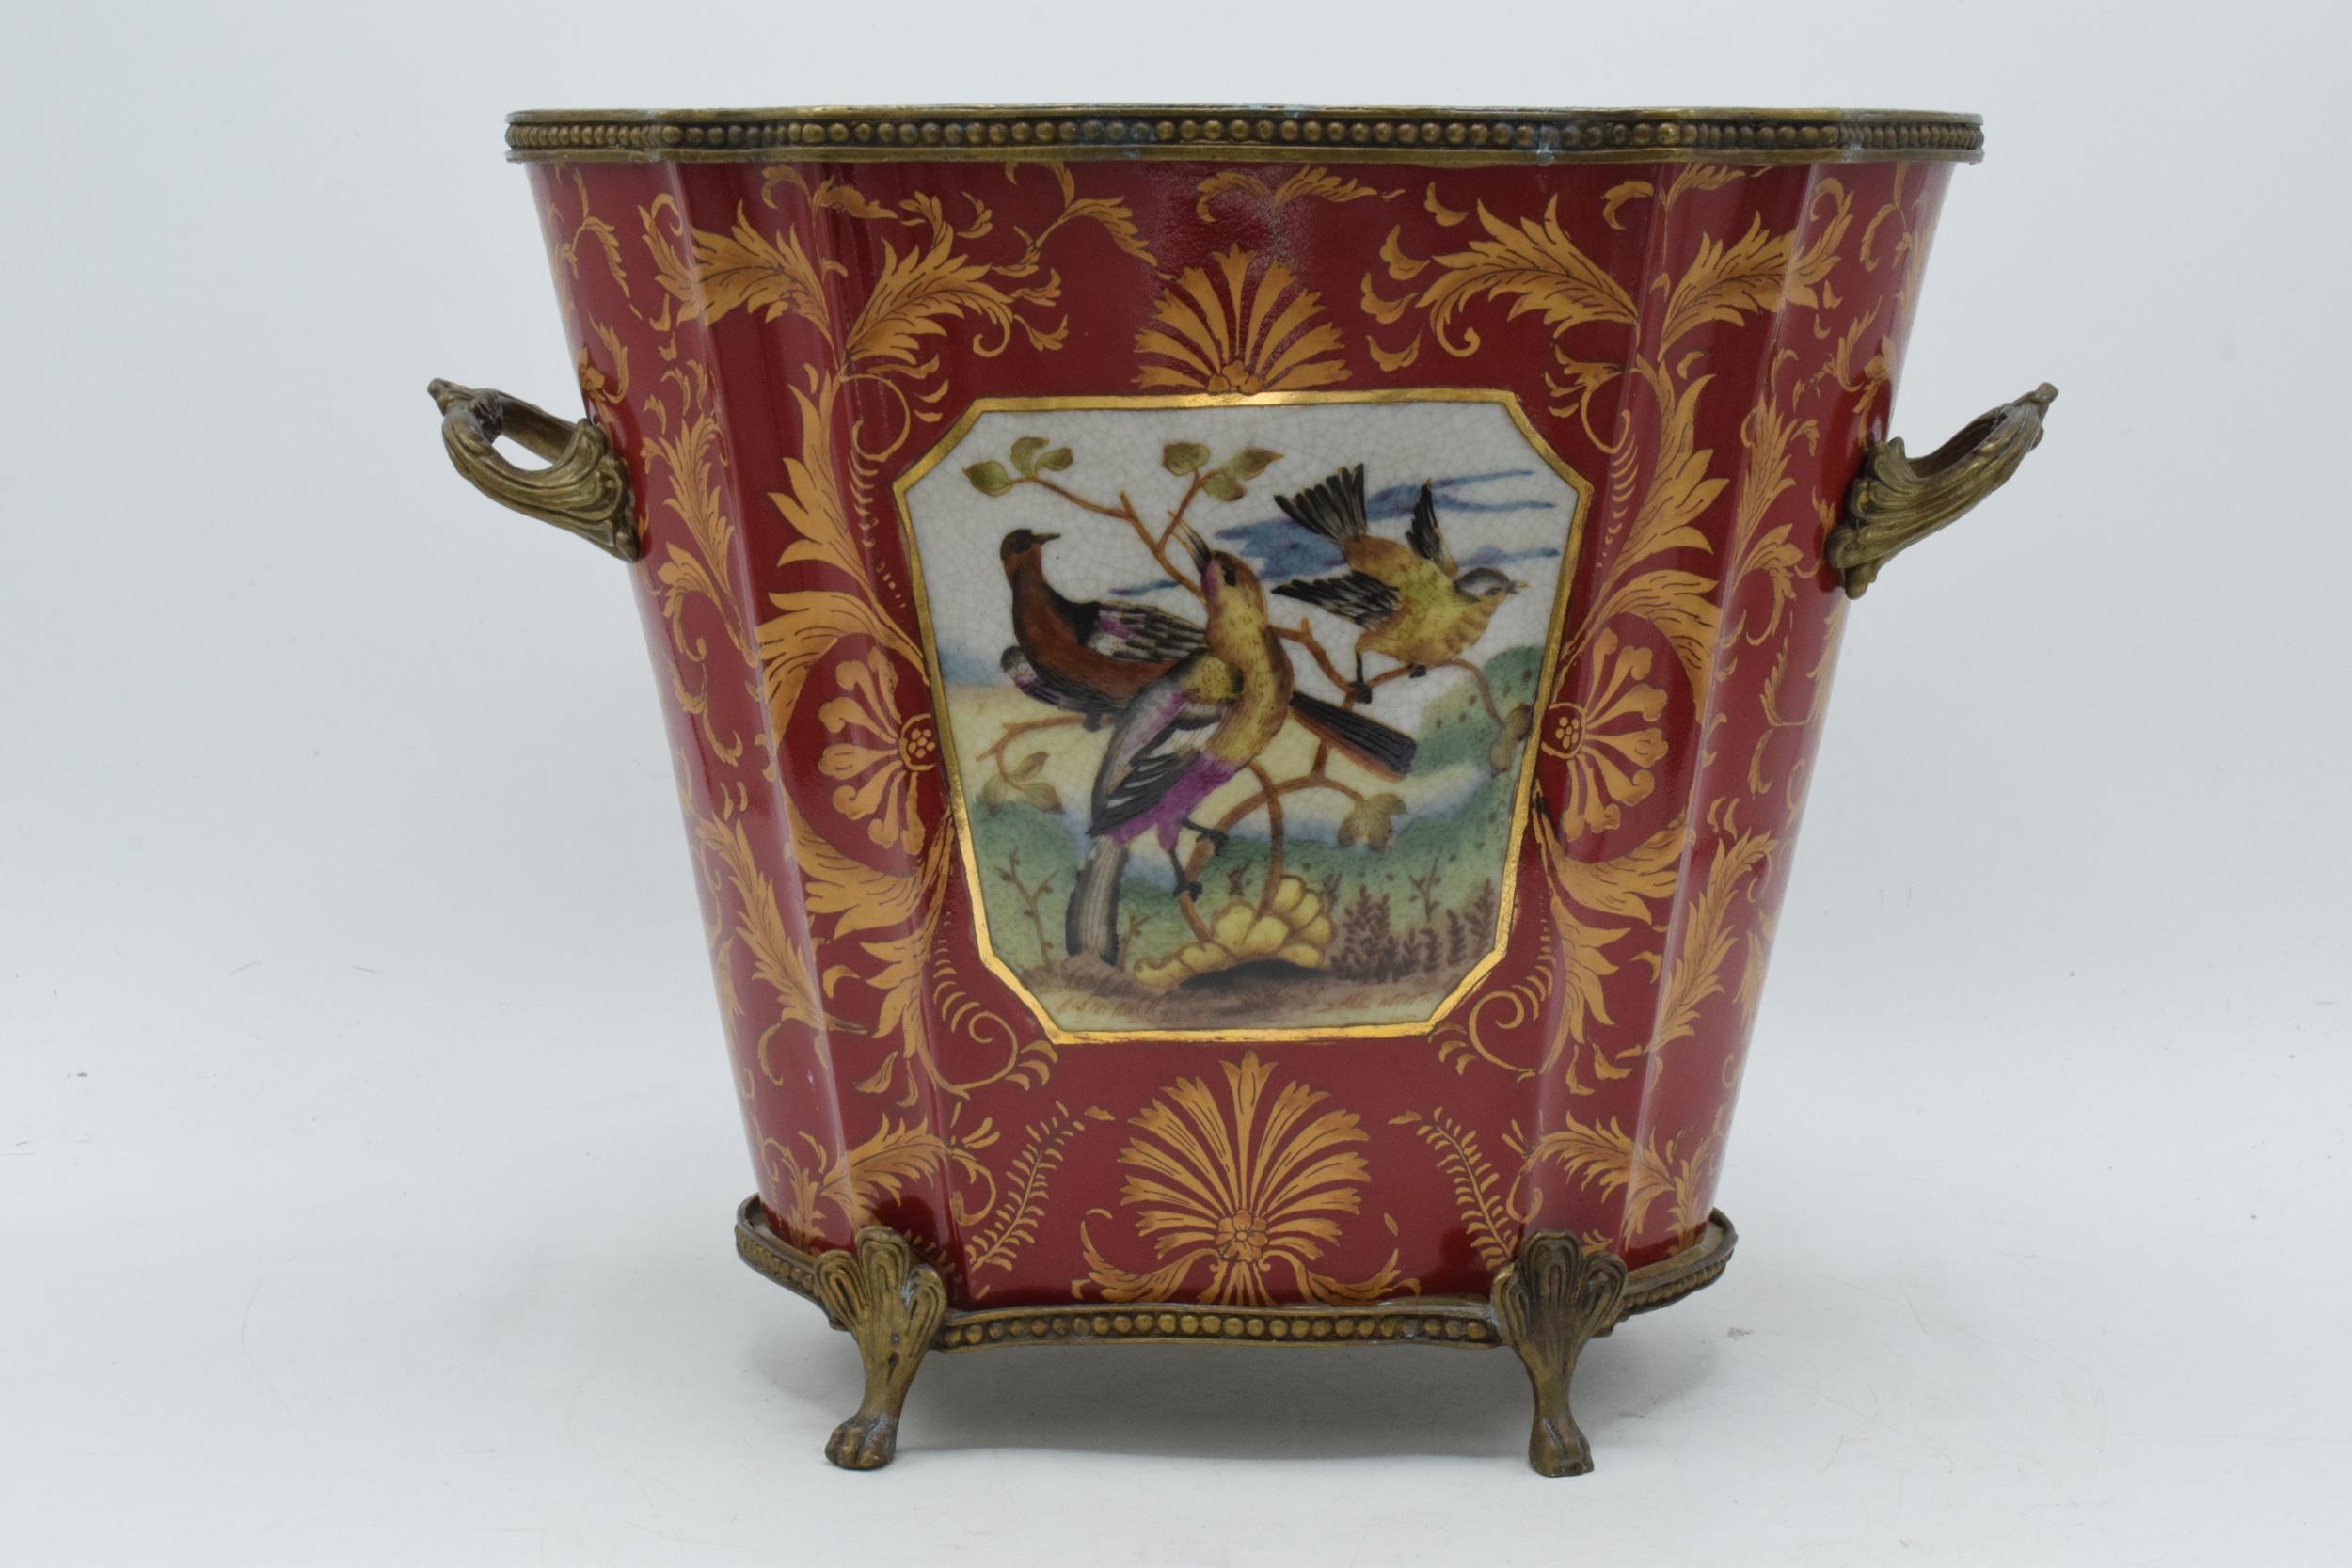 Late 19th century William Lowe pottery jardiniere / planter with brass handles with ornate feet,